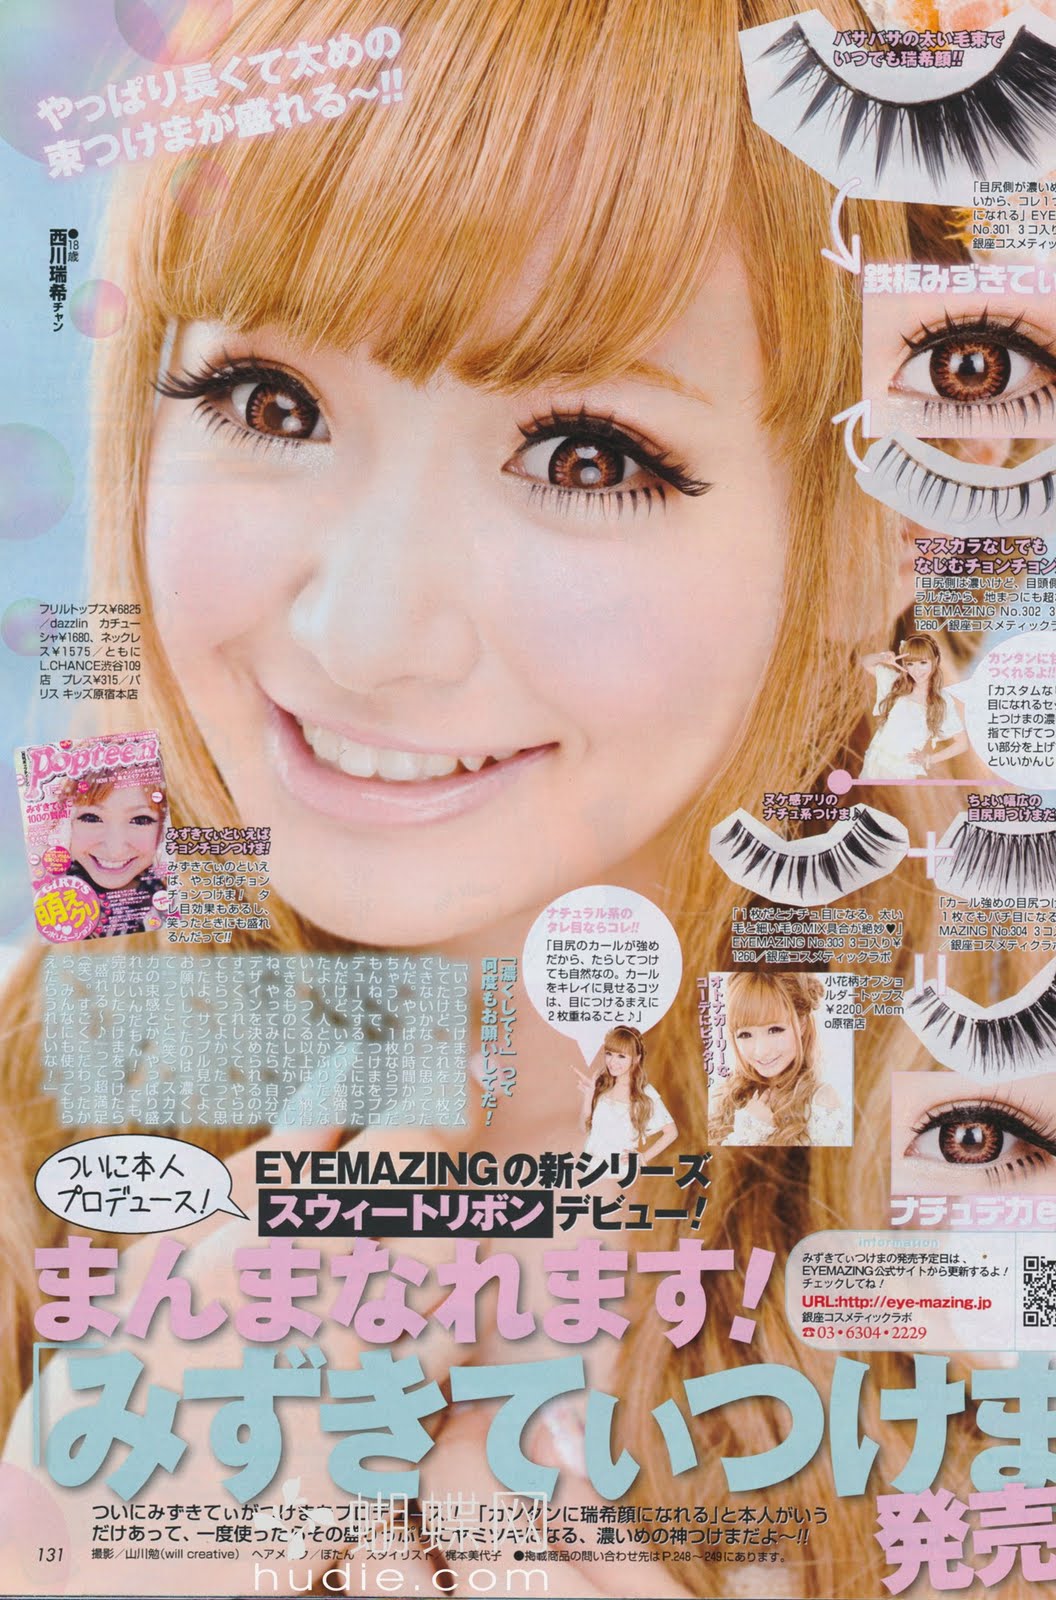 Popteen May 11 Magazine Scans Blog Beauty Care Beauty Is Art